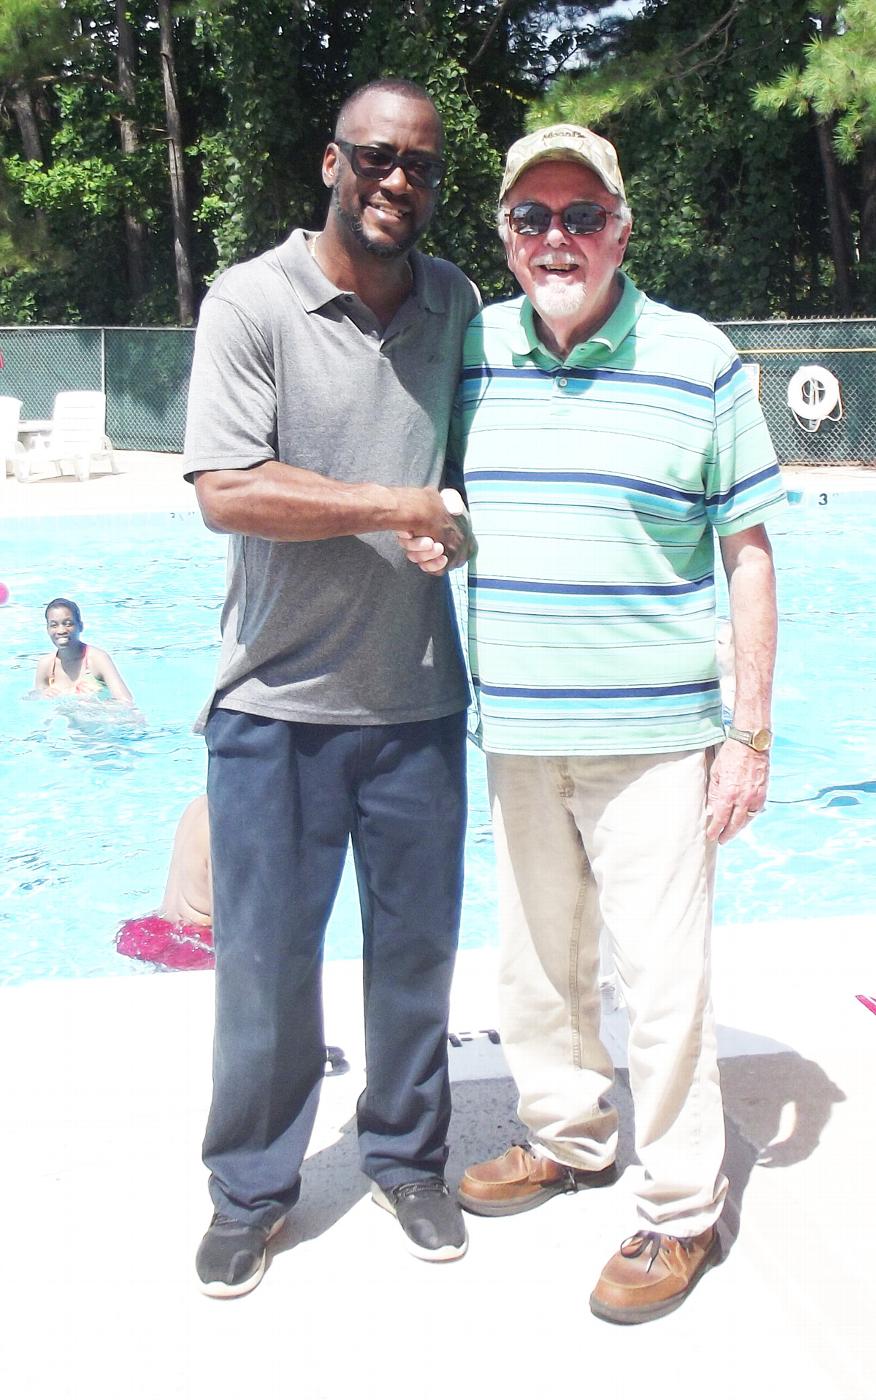 CREST Home Director Kelvin Harney (L) with PER Phil Saunders (R)...Elks Hosted Pool Party & Cookout for Disabled Residents 